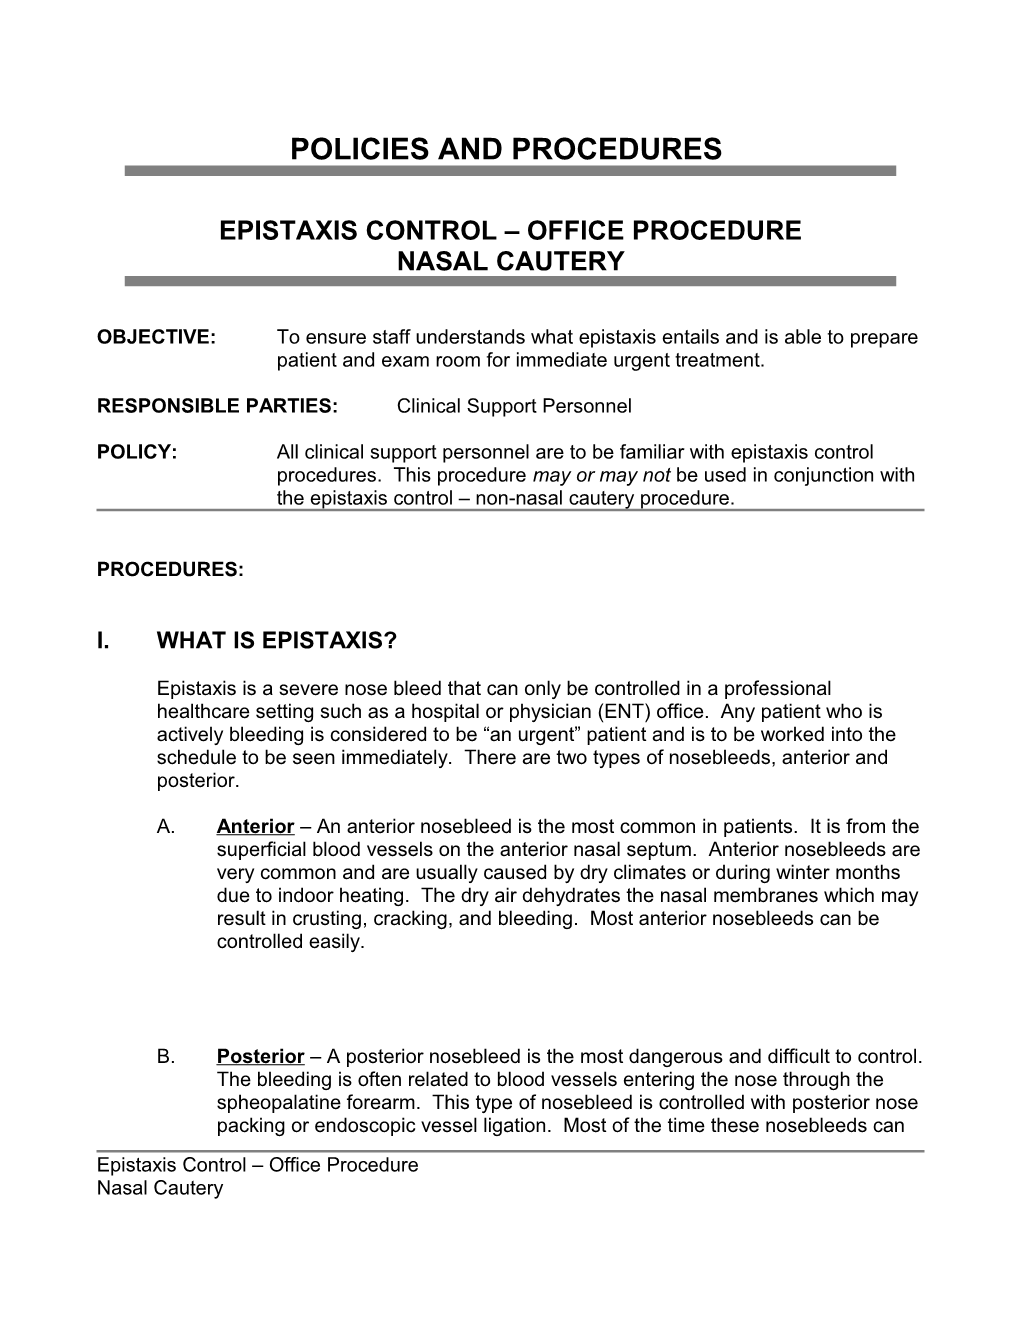 Epistaxis Control Office Procedure